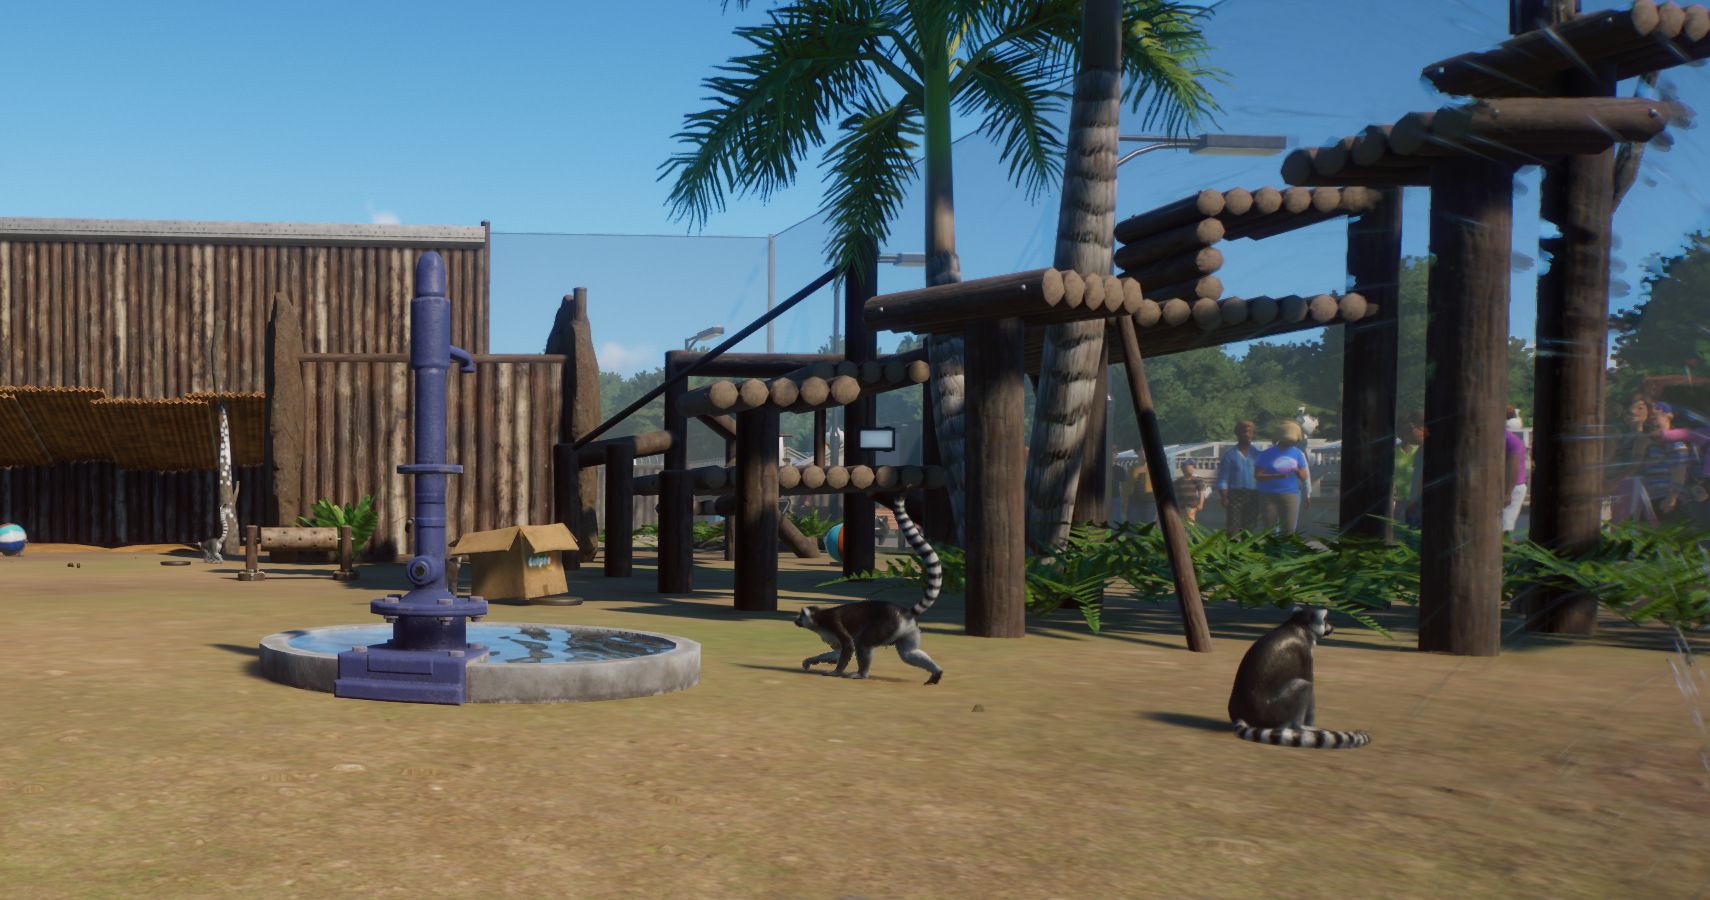 The view inside a lemur exhibit showing a lemur and climbing frame as well as a water pipe.